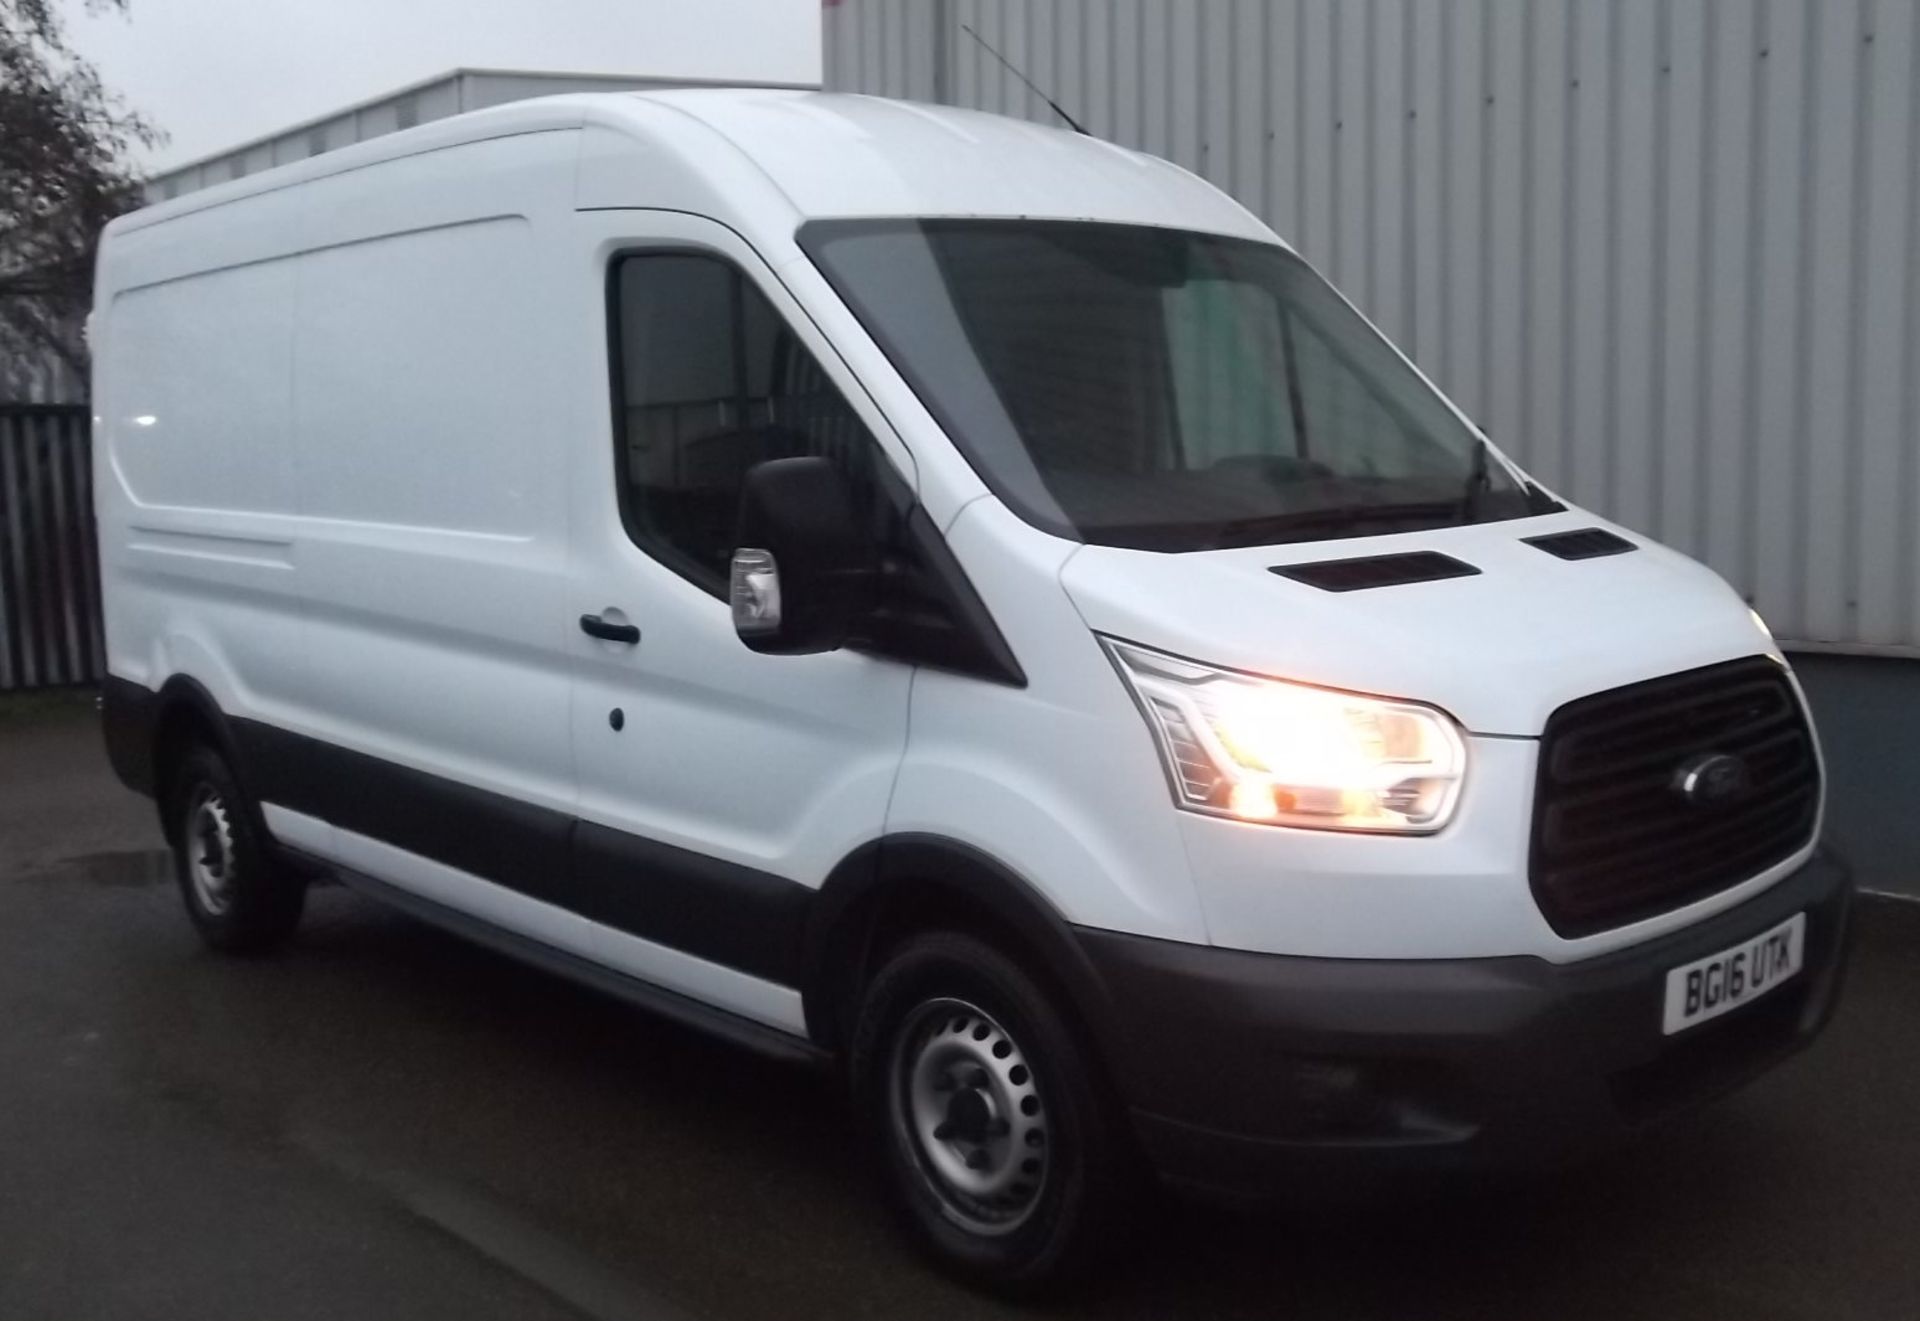 2016 Ford Transit 350 2.2 TDCi 125ps H2L3 Panel Van - CL505 - Location: Corby, Northamptonshire